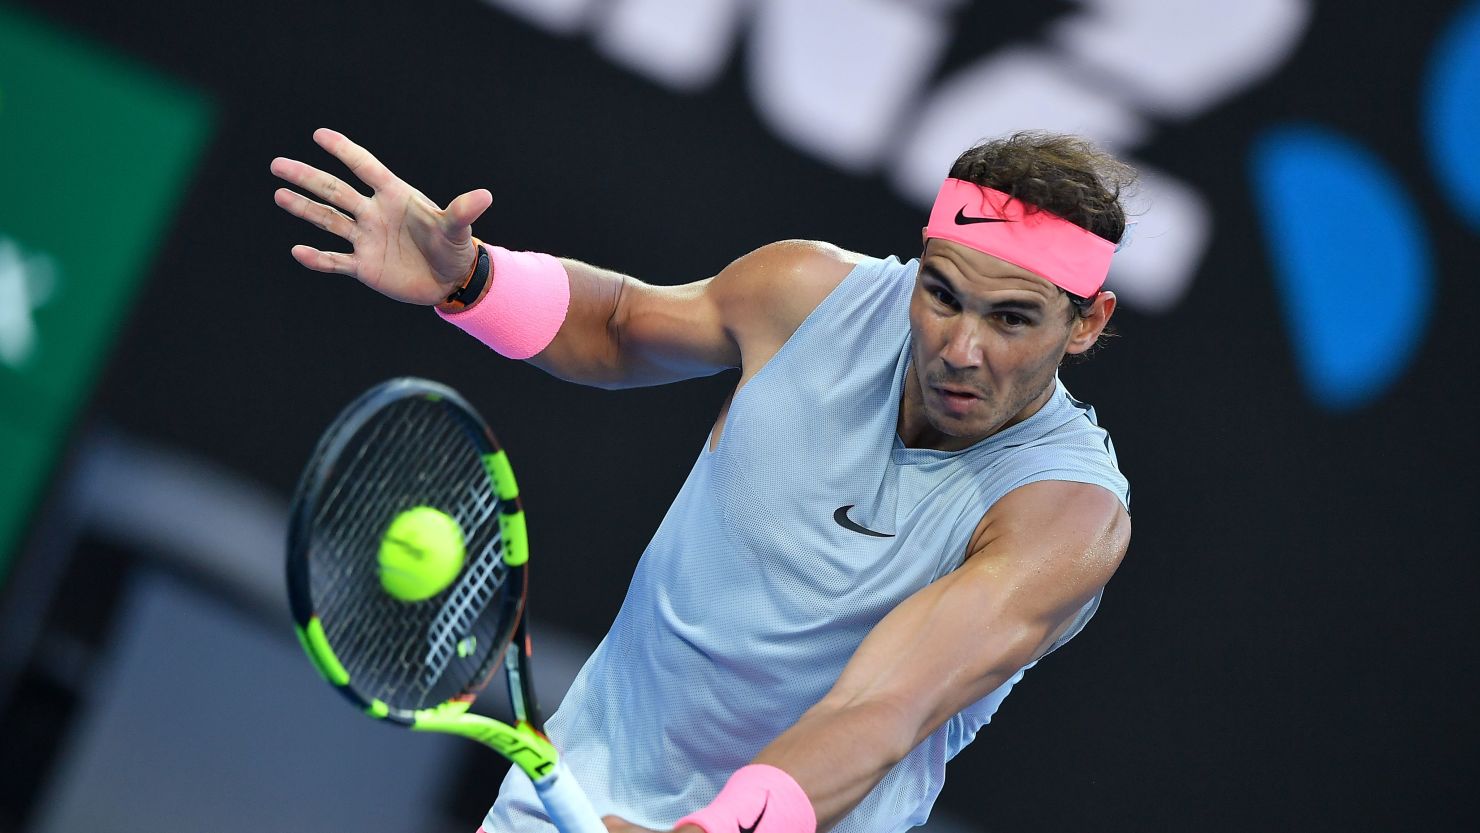 Spain's Rafael Nadal hits a return against Dominican Republic's Victor Estrella Burgos during their men's singles first round match on day one of the Australian Open tennis tournament in Melbourne on January 15, 2018. / AFP PHOTO / Greg Wood / -- IMAGE RESTRICTED TO EDITORIAL USE - STRICTLY NO COMMERCIAL USE --        (Photo credit should read GREG WOOD/AFP/Getty Images)